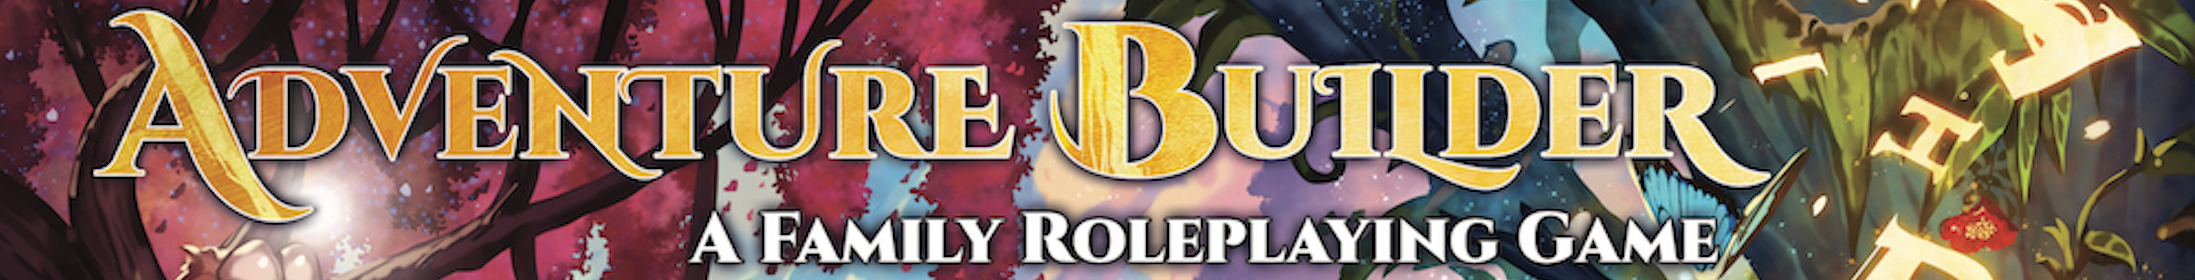 Adventure Builder: A Family Roleplaying Game